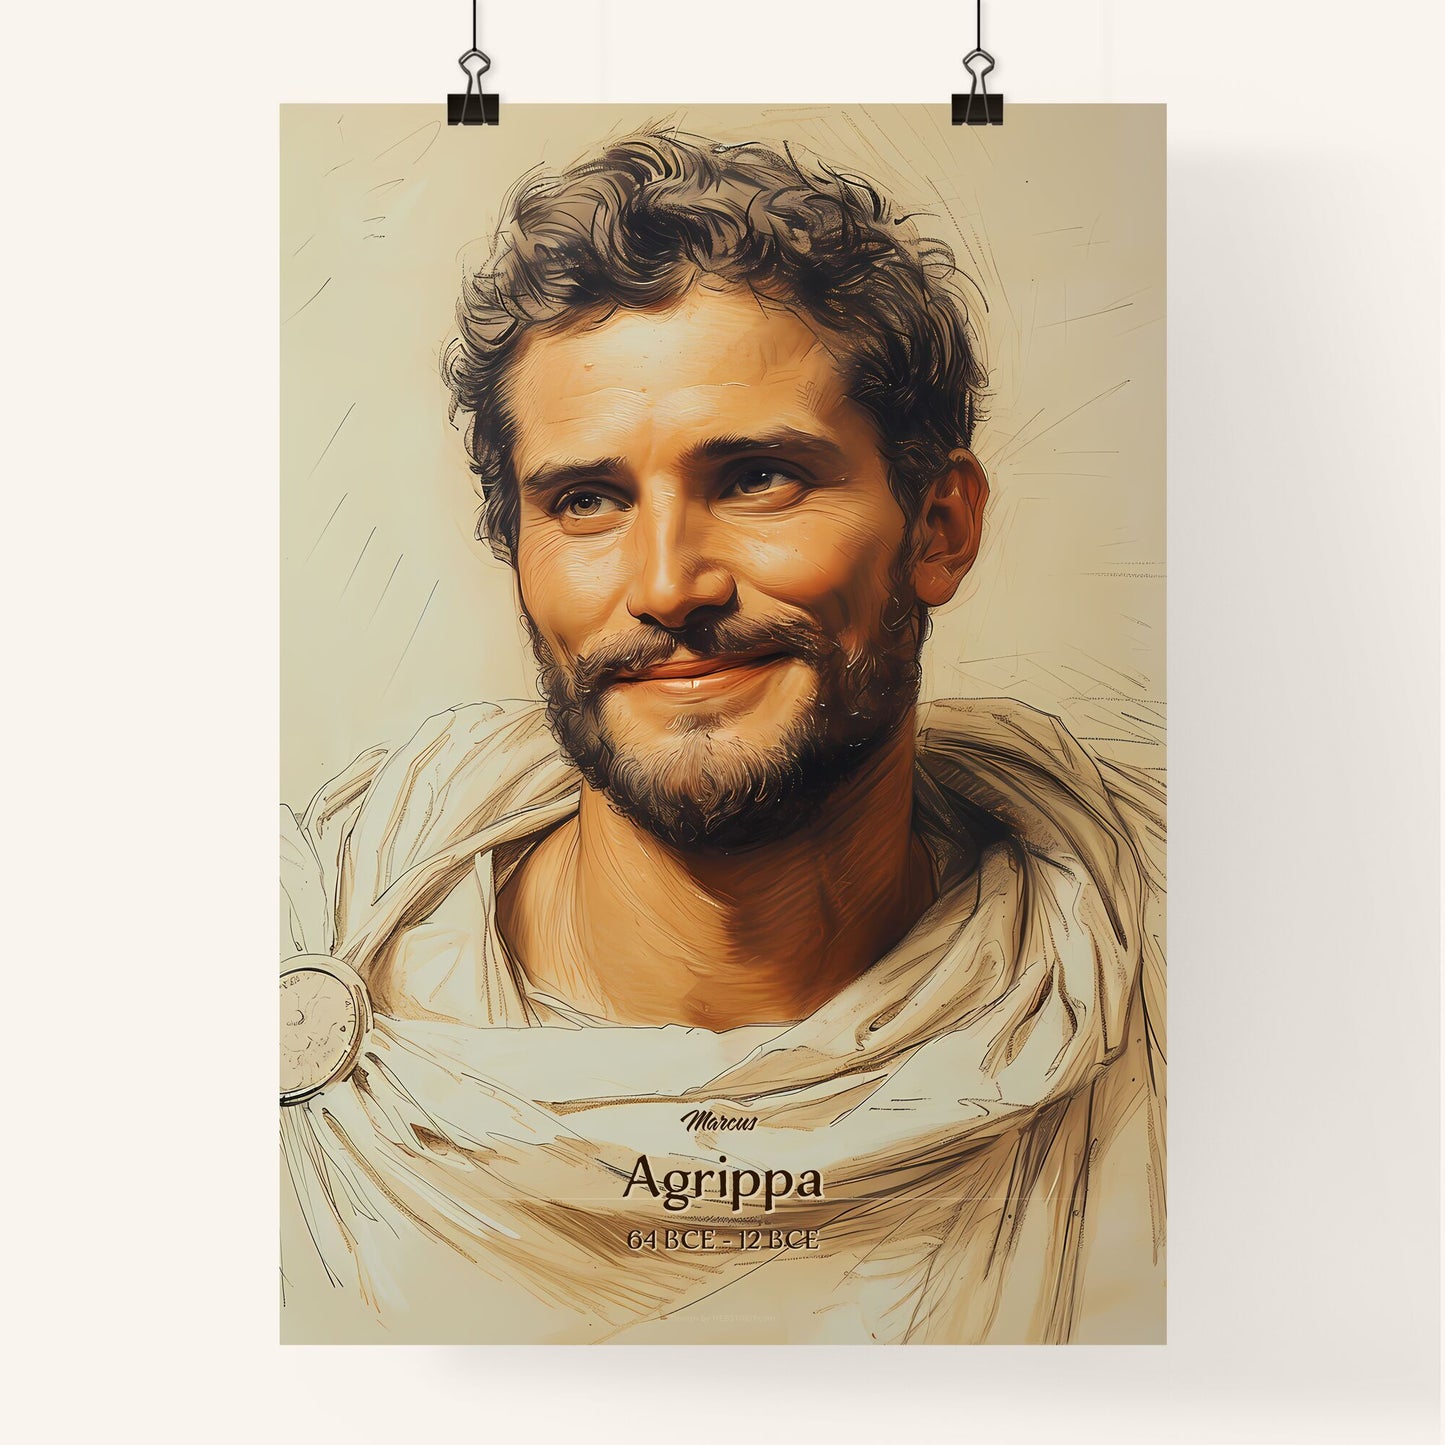 Marcus, Agrippa, 64 BCE - 12 BCE, A Poster of a man in a robe Default Title